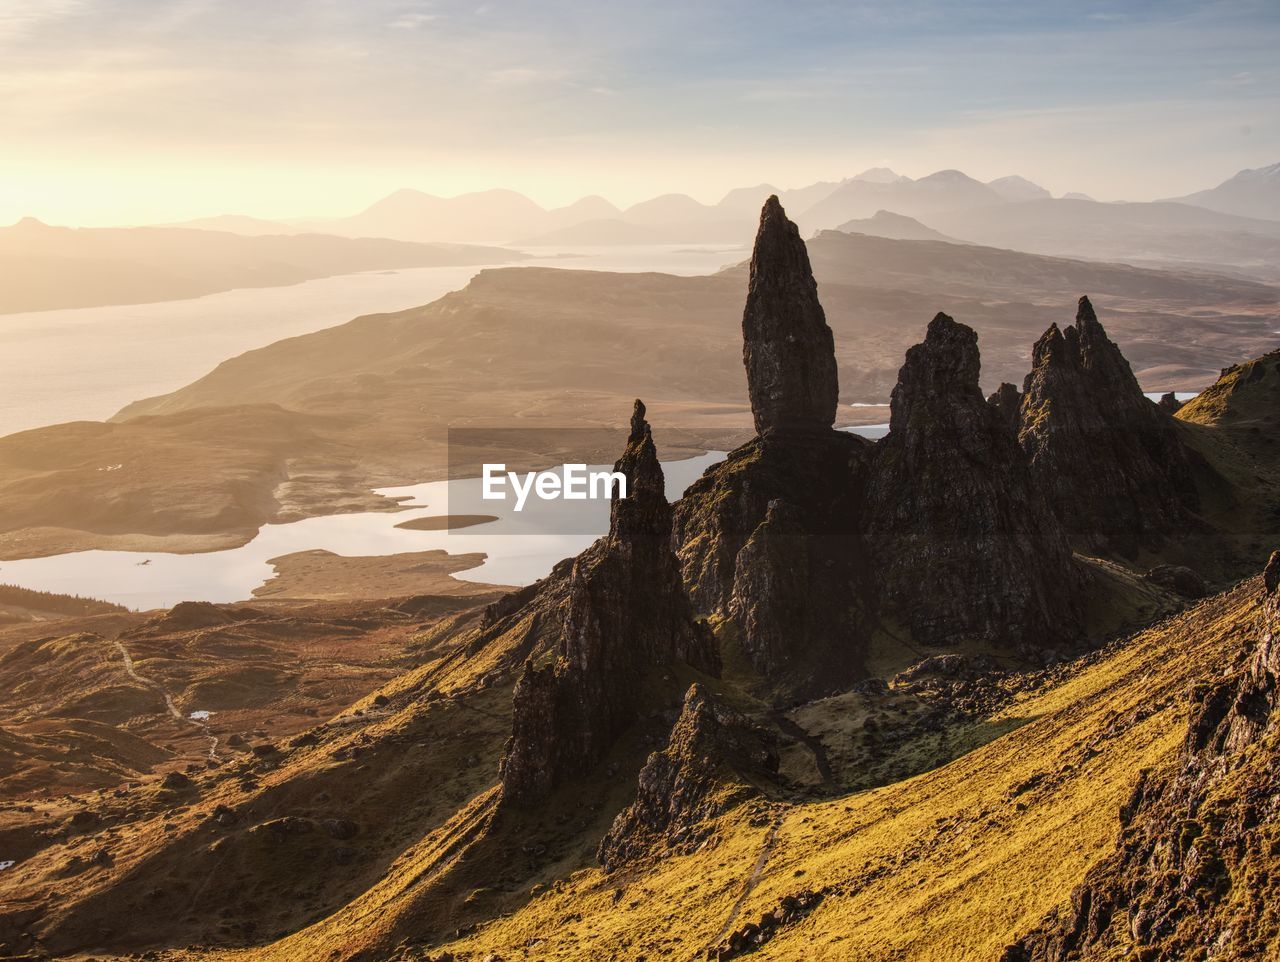 Sunrise at the old man of storr - amazing scenery with vivid colors. symbolic tourist attraction